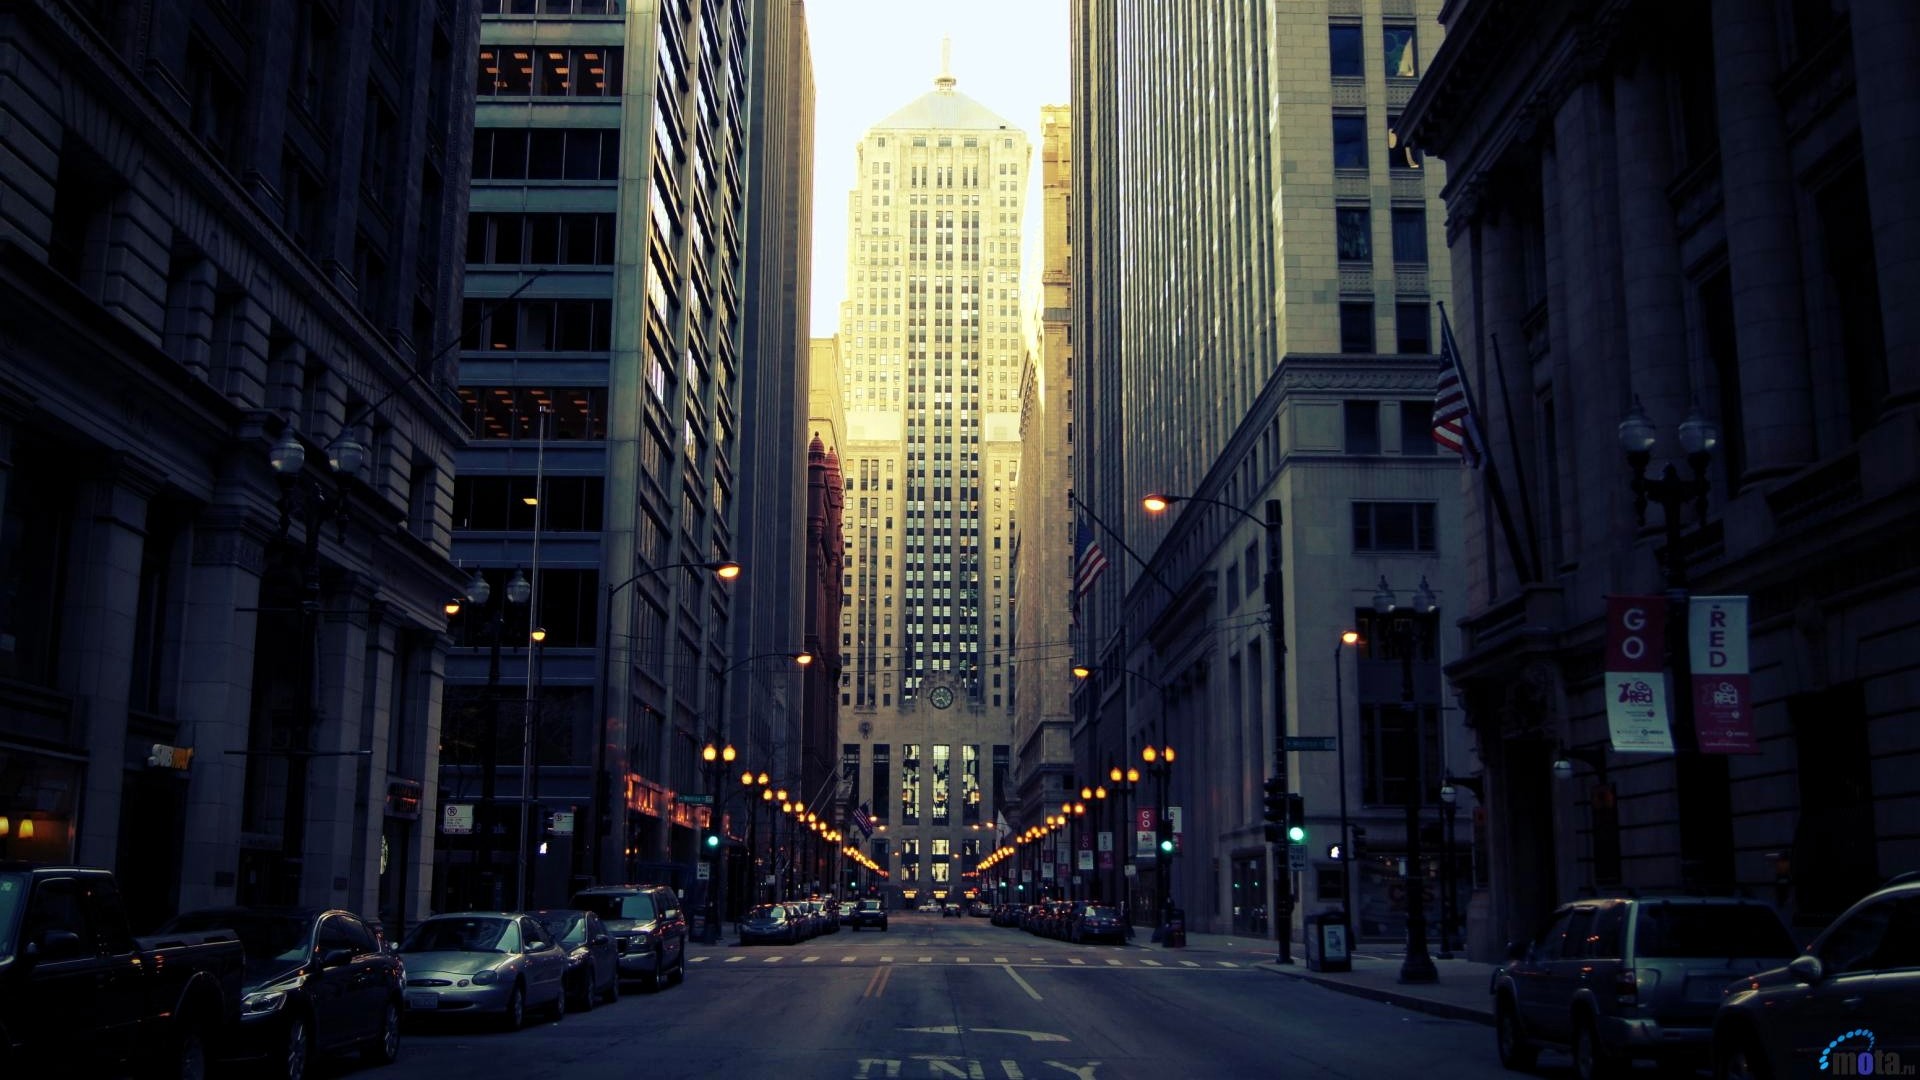 HD Streets of Chicago Wallpaper